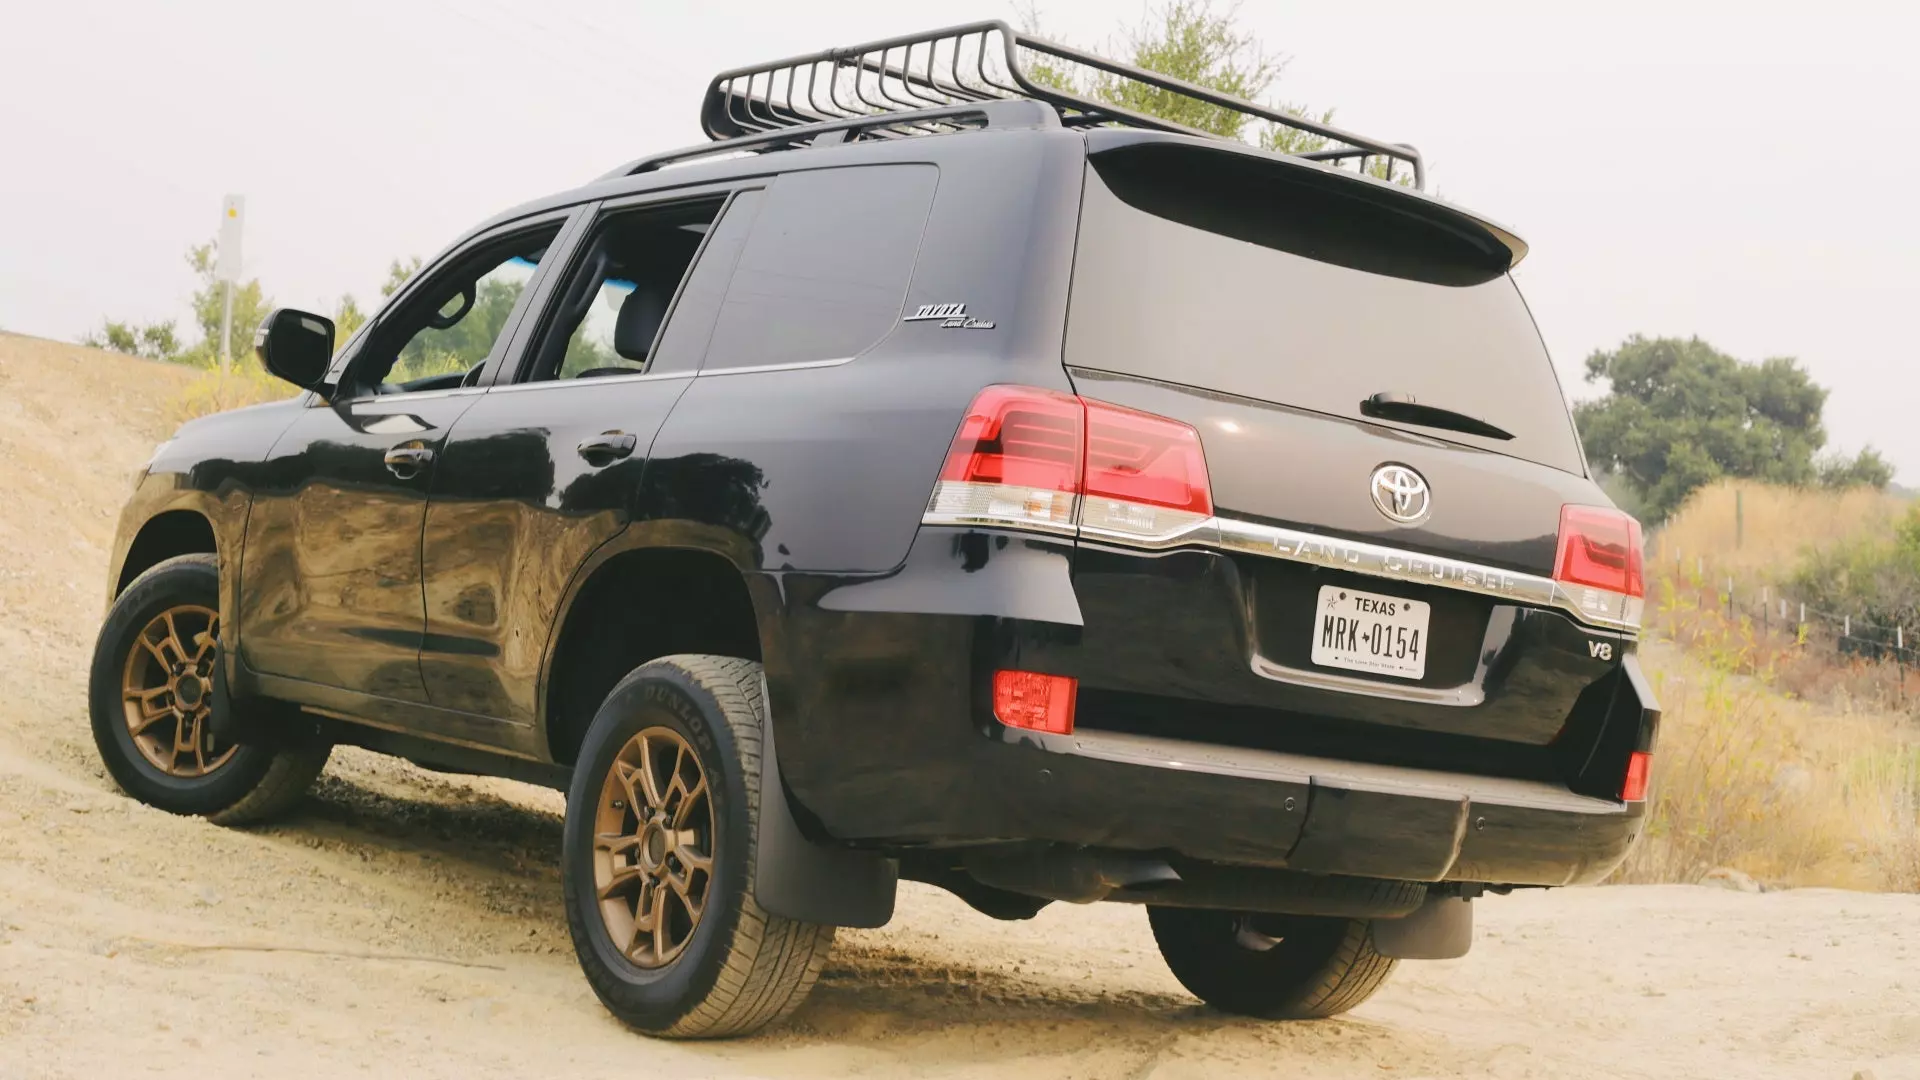 The J200 Toyota Land Cruiser Taught Me That Off-Roaders Are Just As Fun As Sports Cars